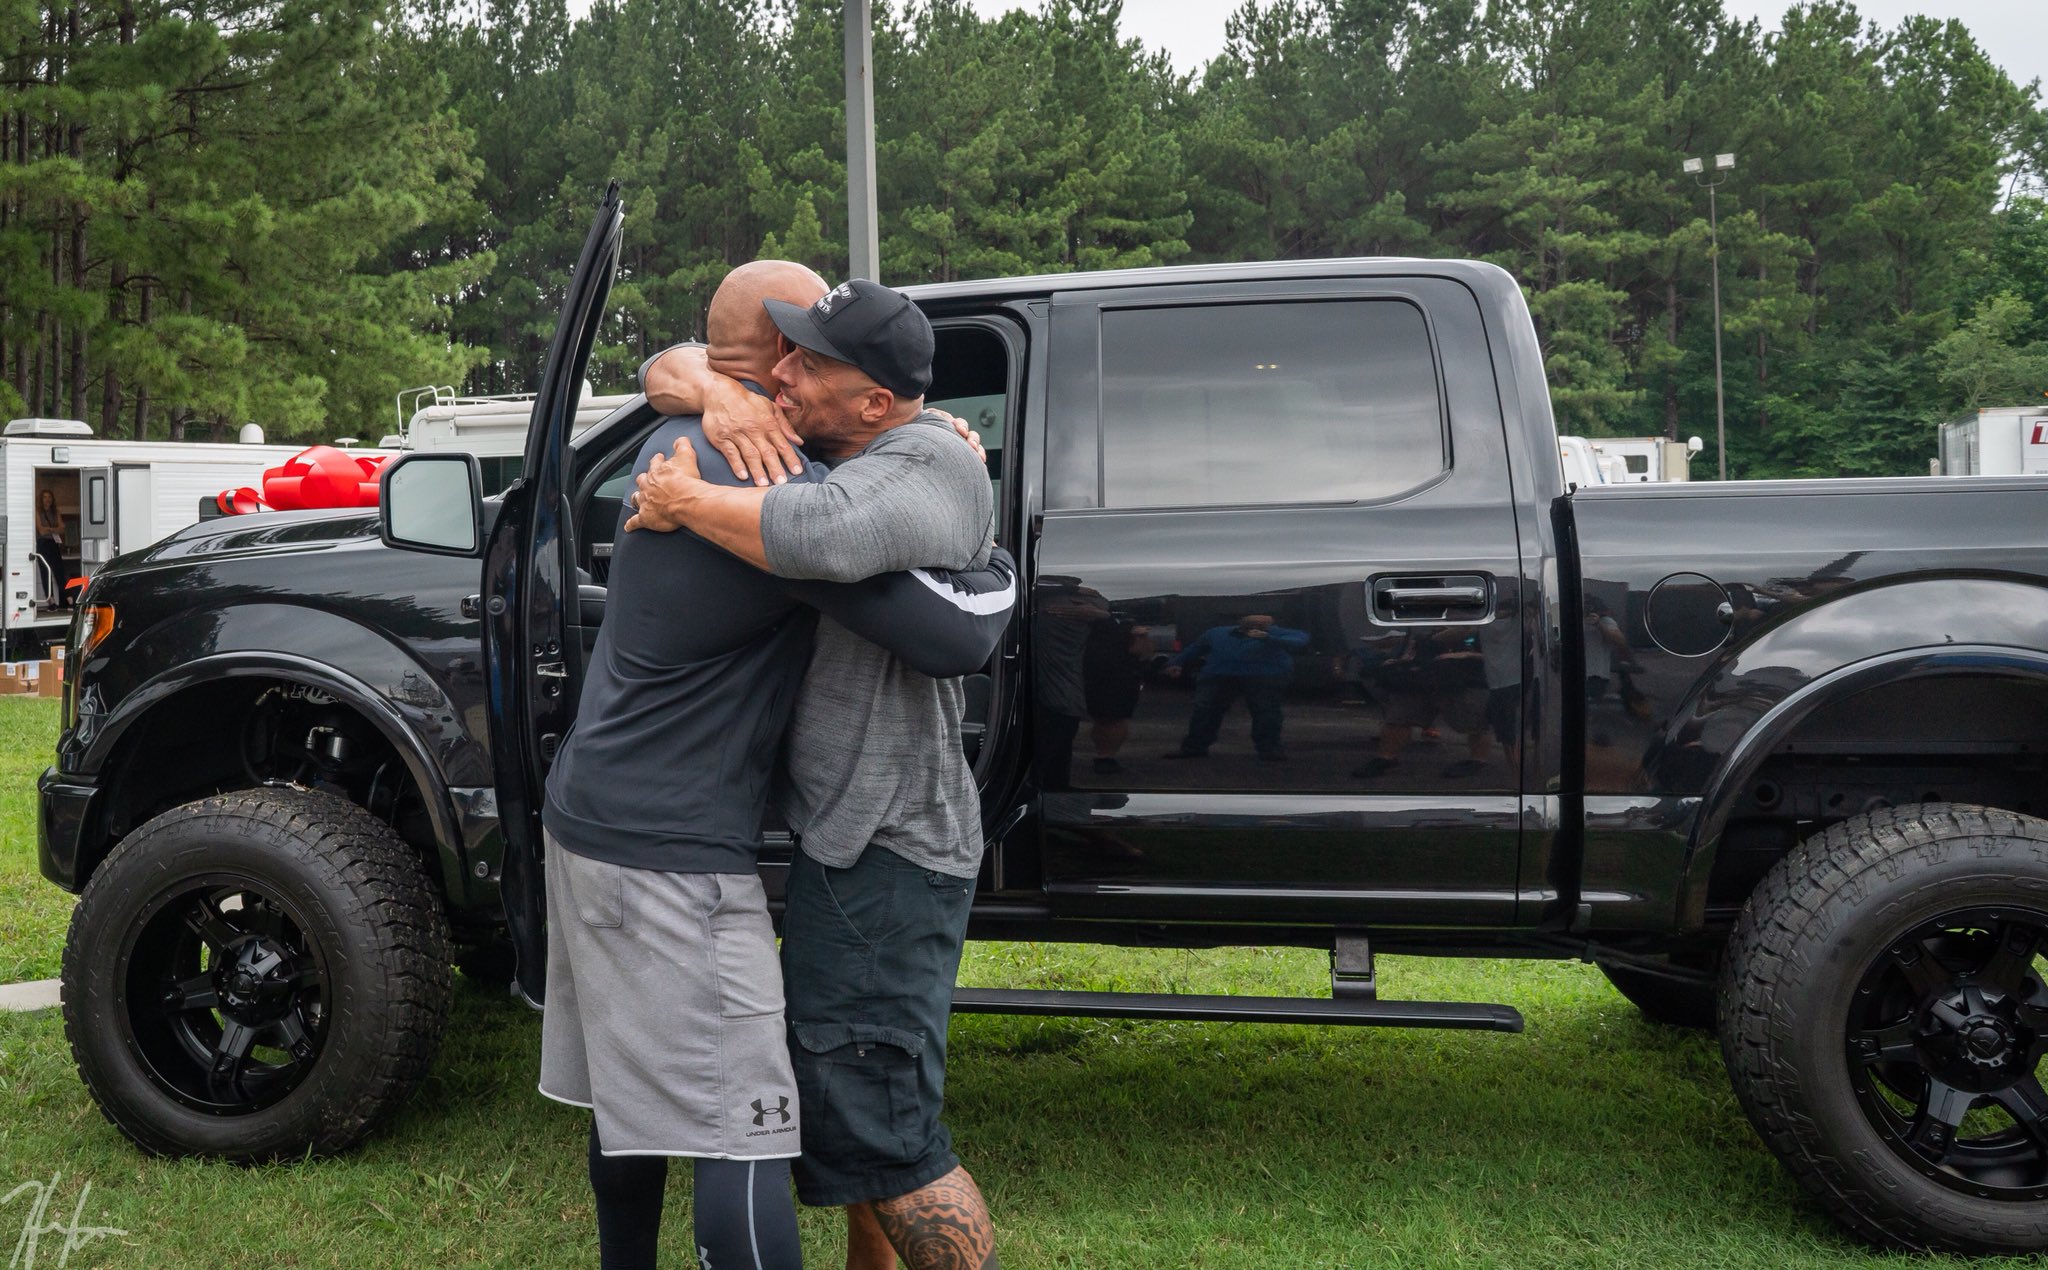 The Rock Surprised Everyone By Making His Stunt Brother Tanoai Reed’s Dream Come True By Giving Him A New Chrome Ford F-150 Pickup Truck – The Rock